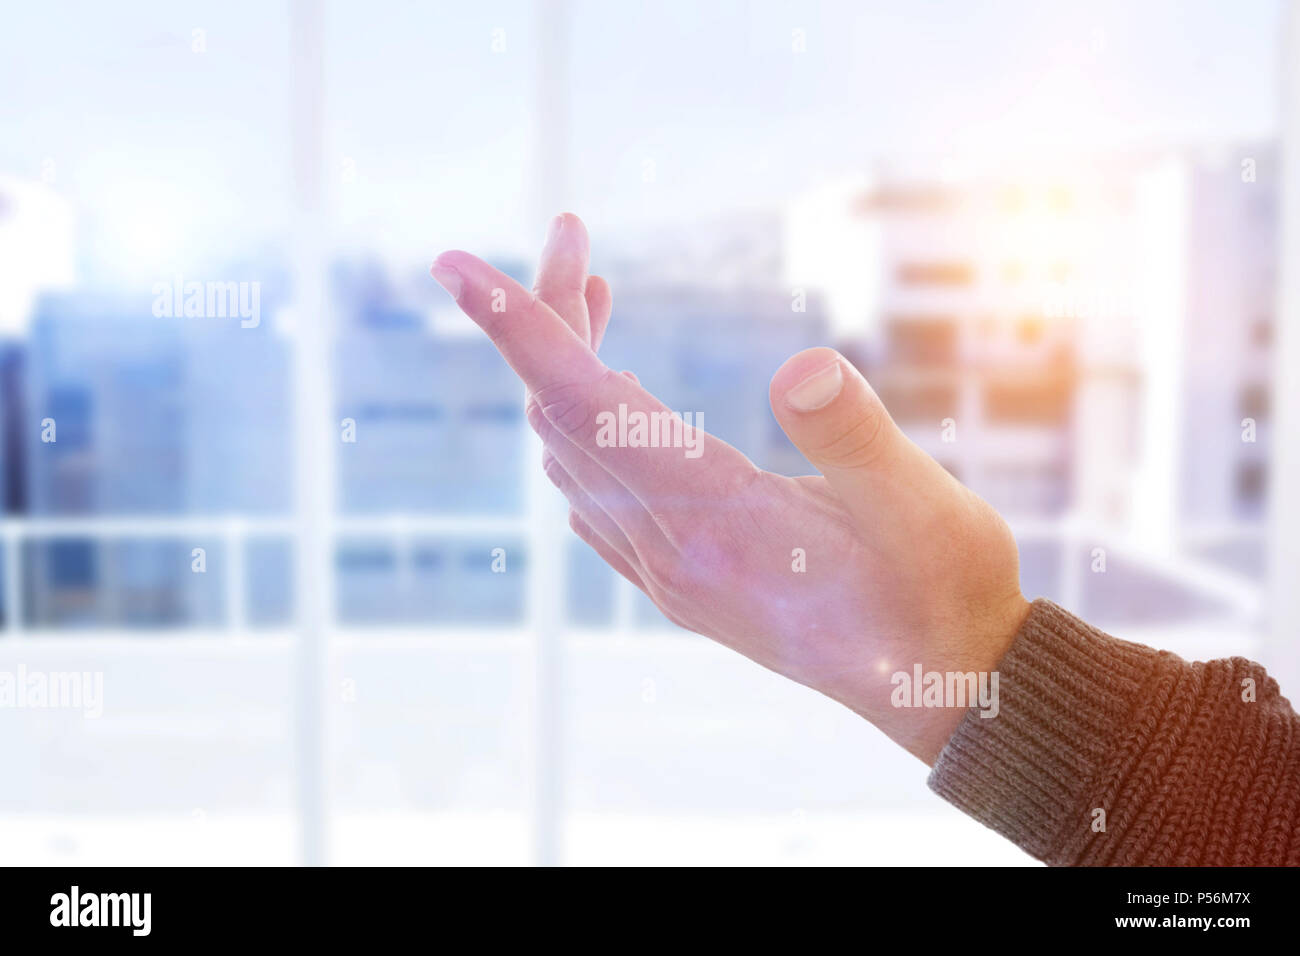 Composite image of hand gesture against white background Stock Photo